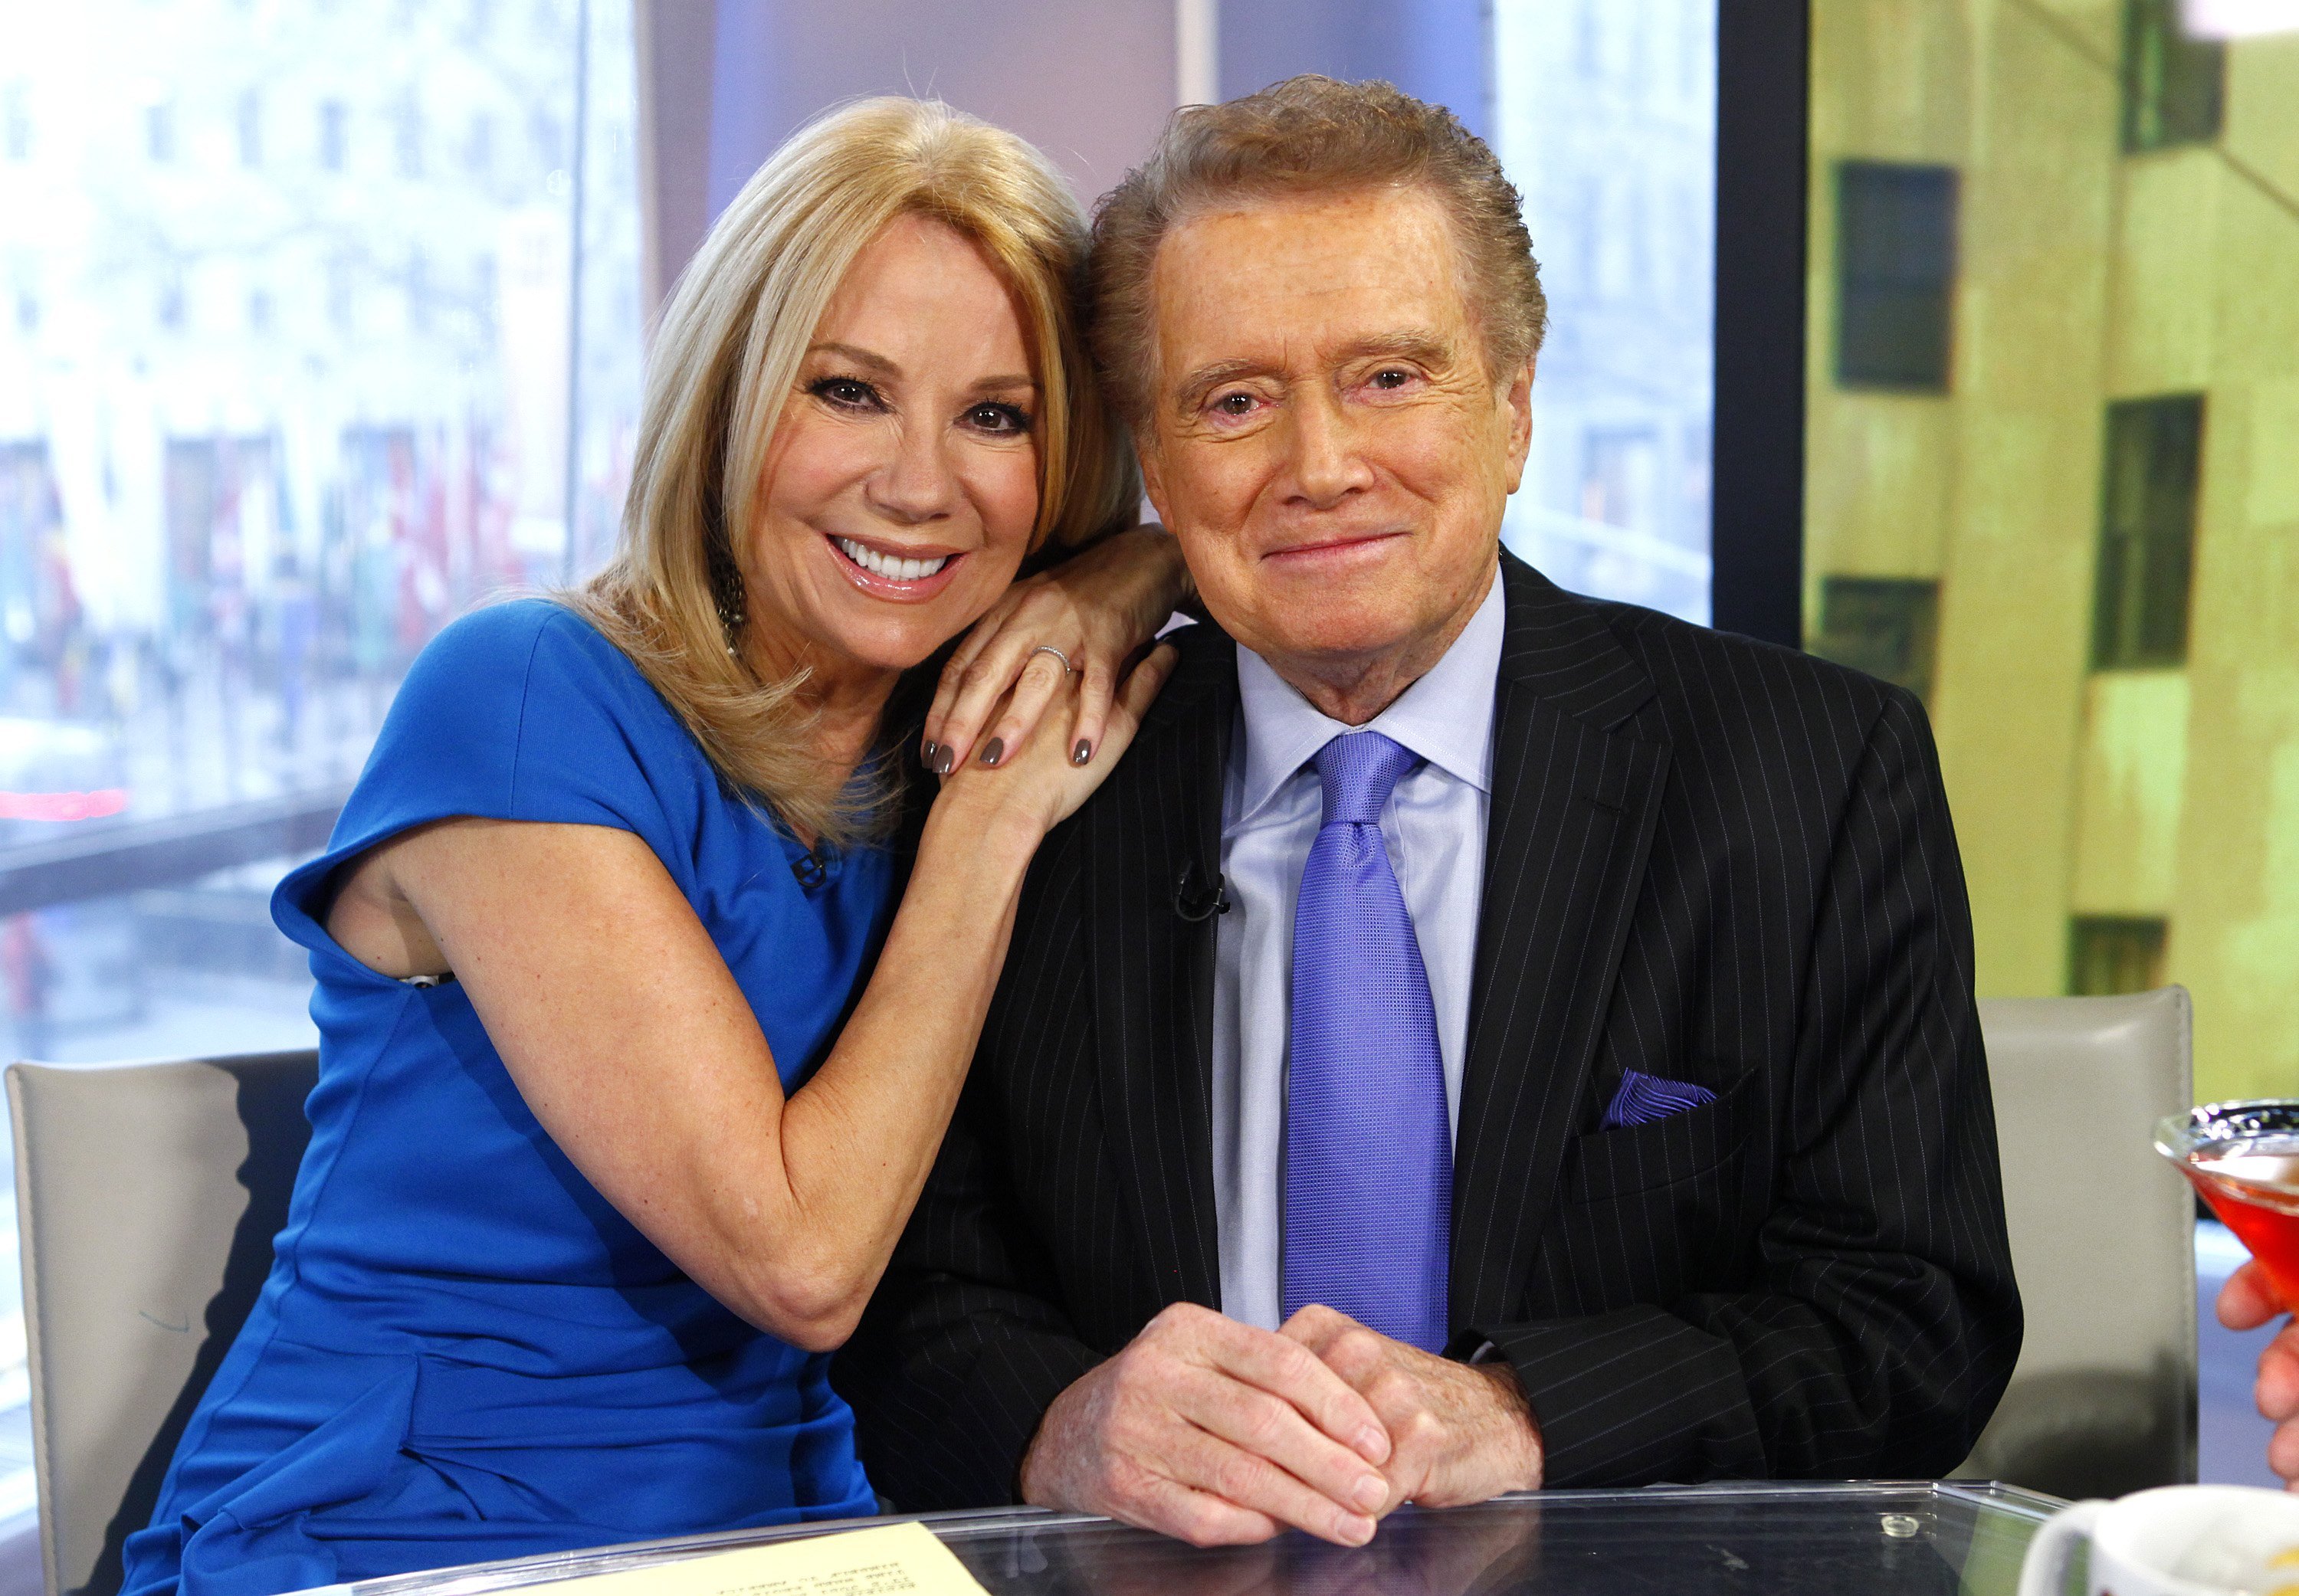 Kathie Lee Gifford and Regis Philbin appear on NBC News' "Today" show. | Photo: Getty Images